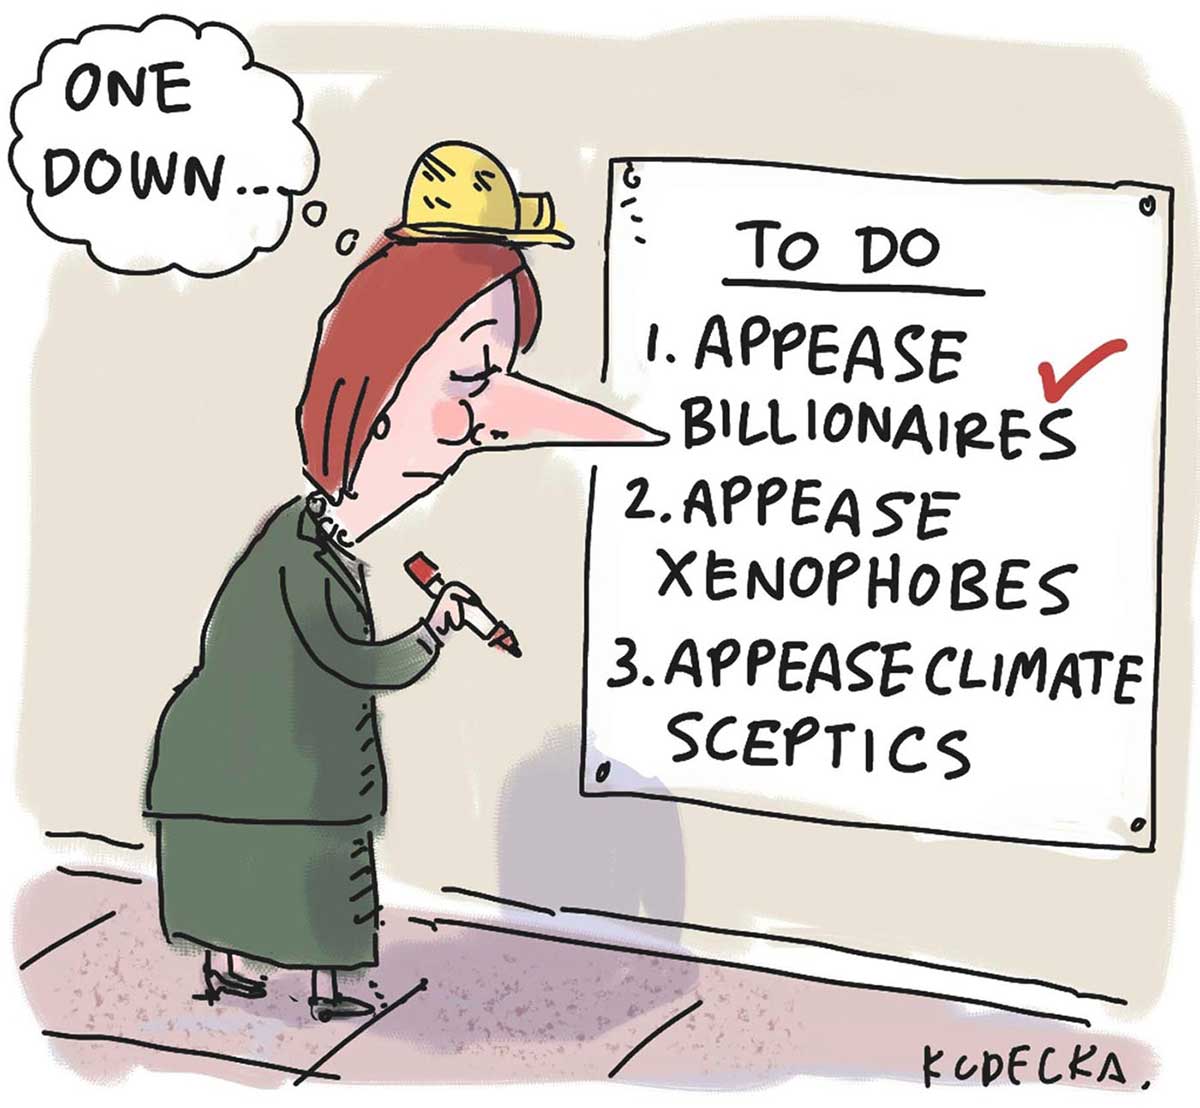 Political cartoon depicting Julia Gillard standing in front of a list on a wall. She wears a green dress and jacket, and a yellow miner's helmet. She holds a marker pen in her right hand. On the list is written 'To Do 1. Appease Billionaires 2. Appease Xenophobes 3. Appease Climate Sceptics'. Item 1 is ticked off on the list. A thought bubble appears near her head. In it is written 'One down ...'. - click to view larger image